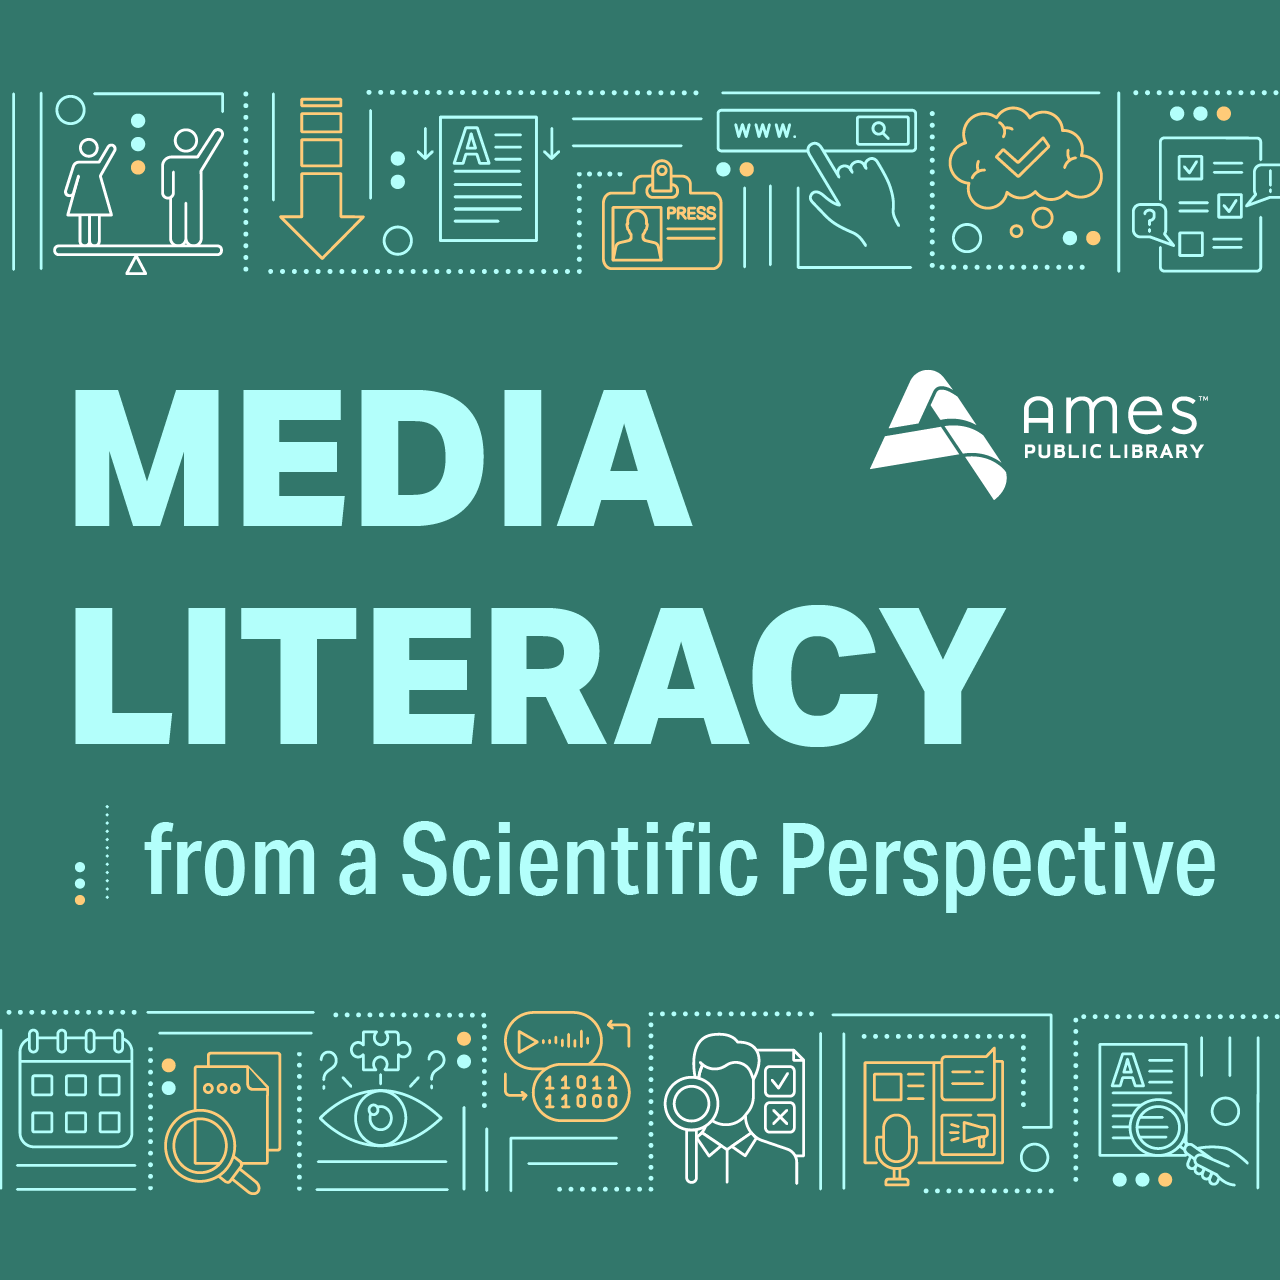 Media Literacy from a Scientific Perspective